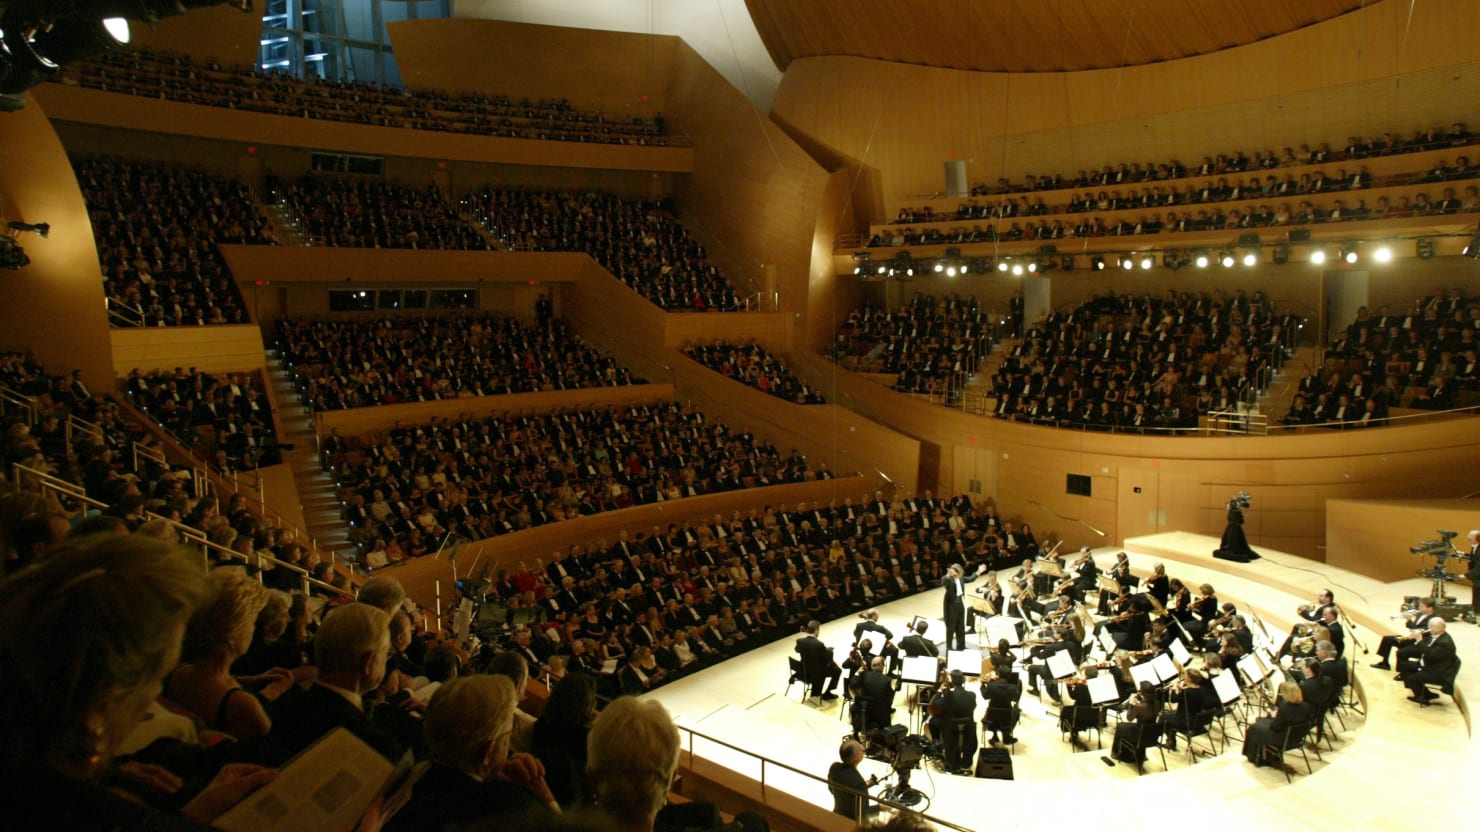 Woman Has ‘SCREAMING Orgasm’ as LA Philharmonic Plays Tchaikovsky: Report – The Daily Beast